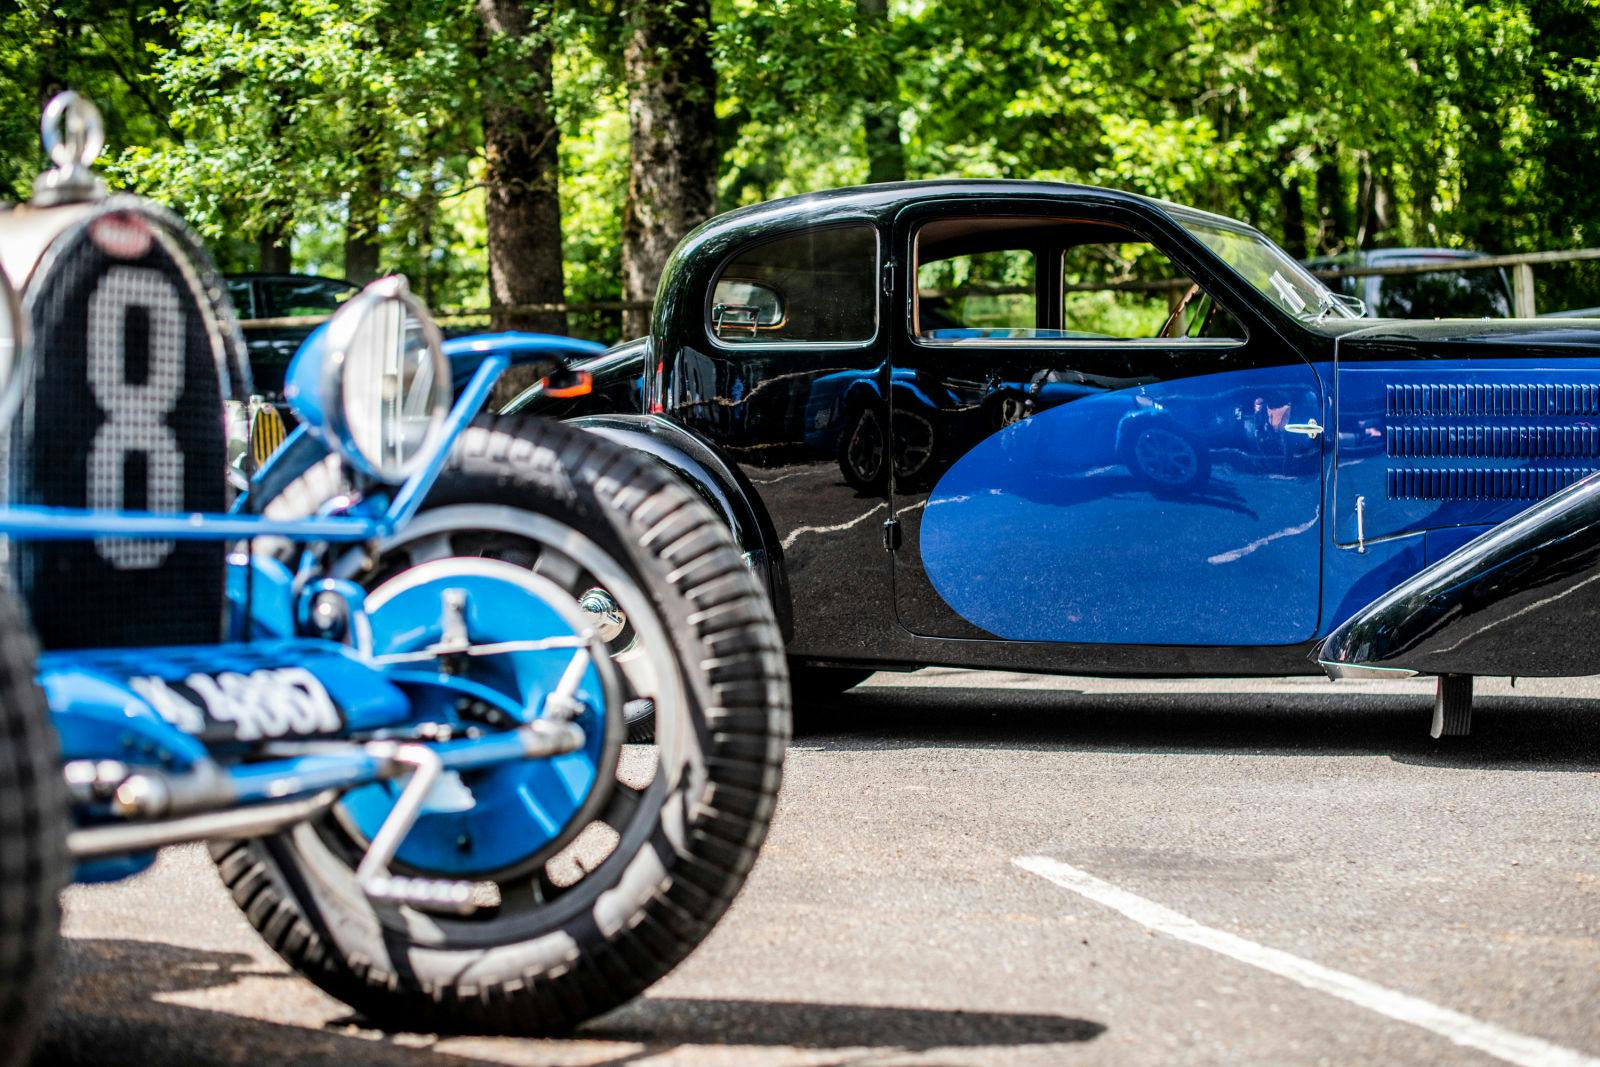 Owners of pre-war Bugatti cars came together to share their passions with admirers around the globe.